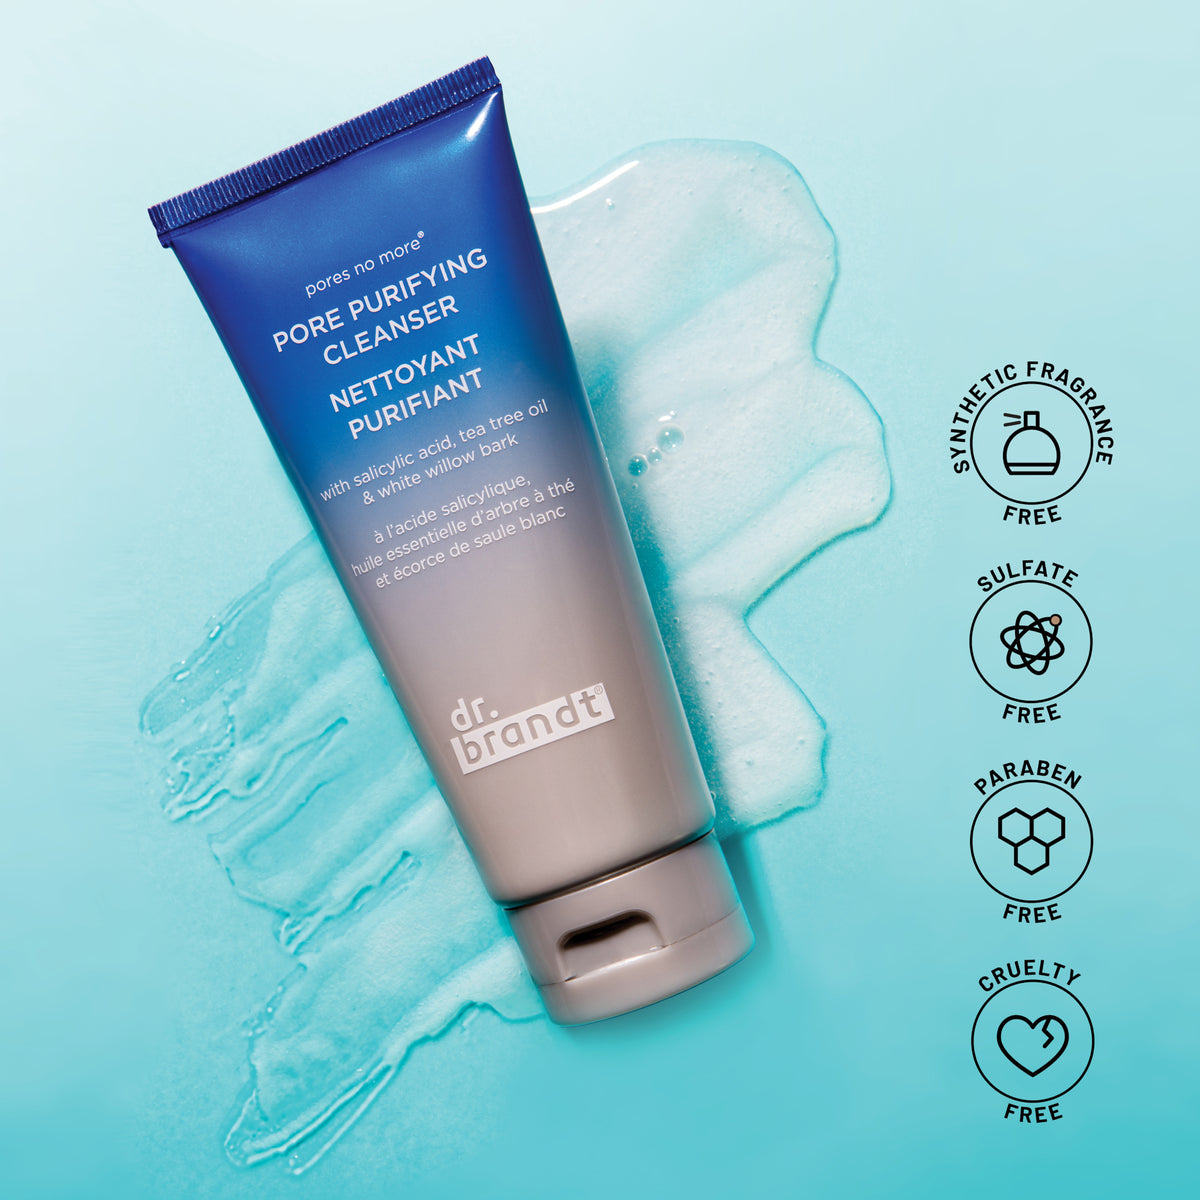 PORE PURIFYING CLEANSER